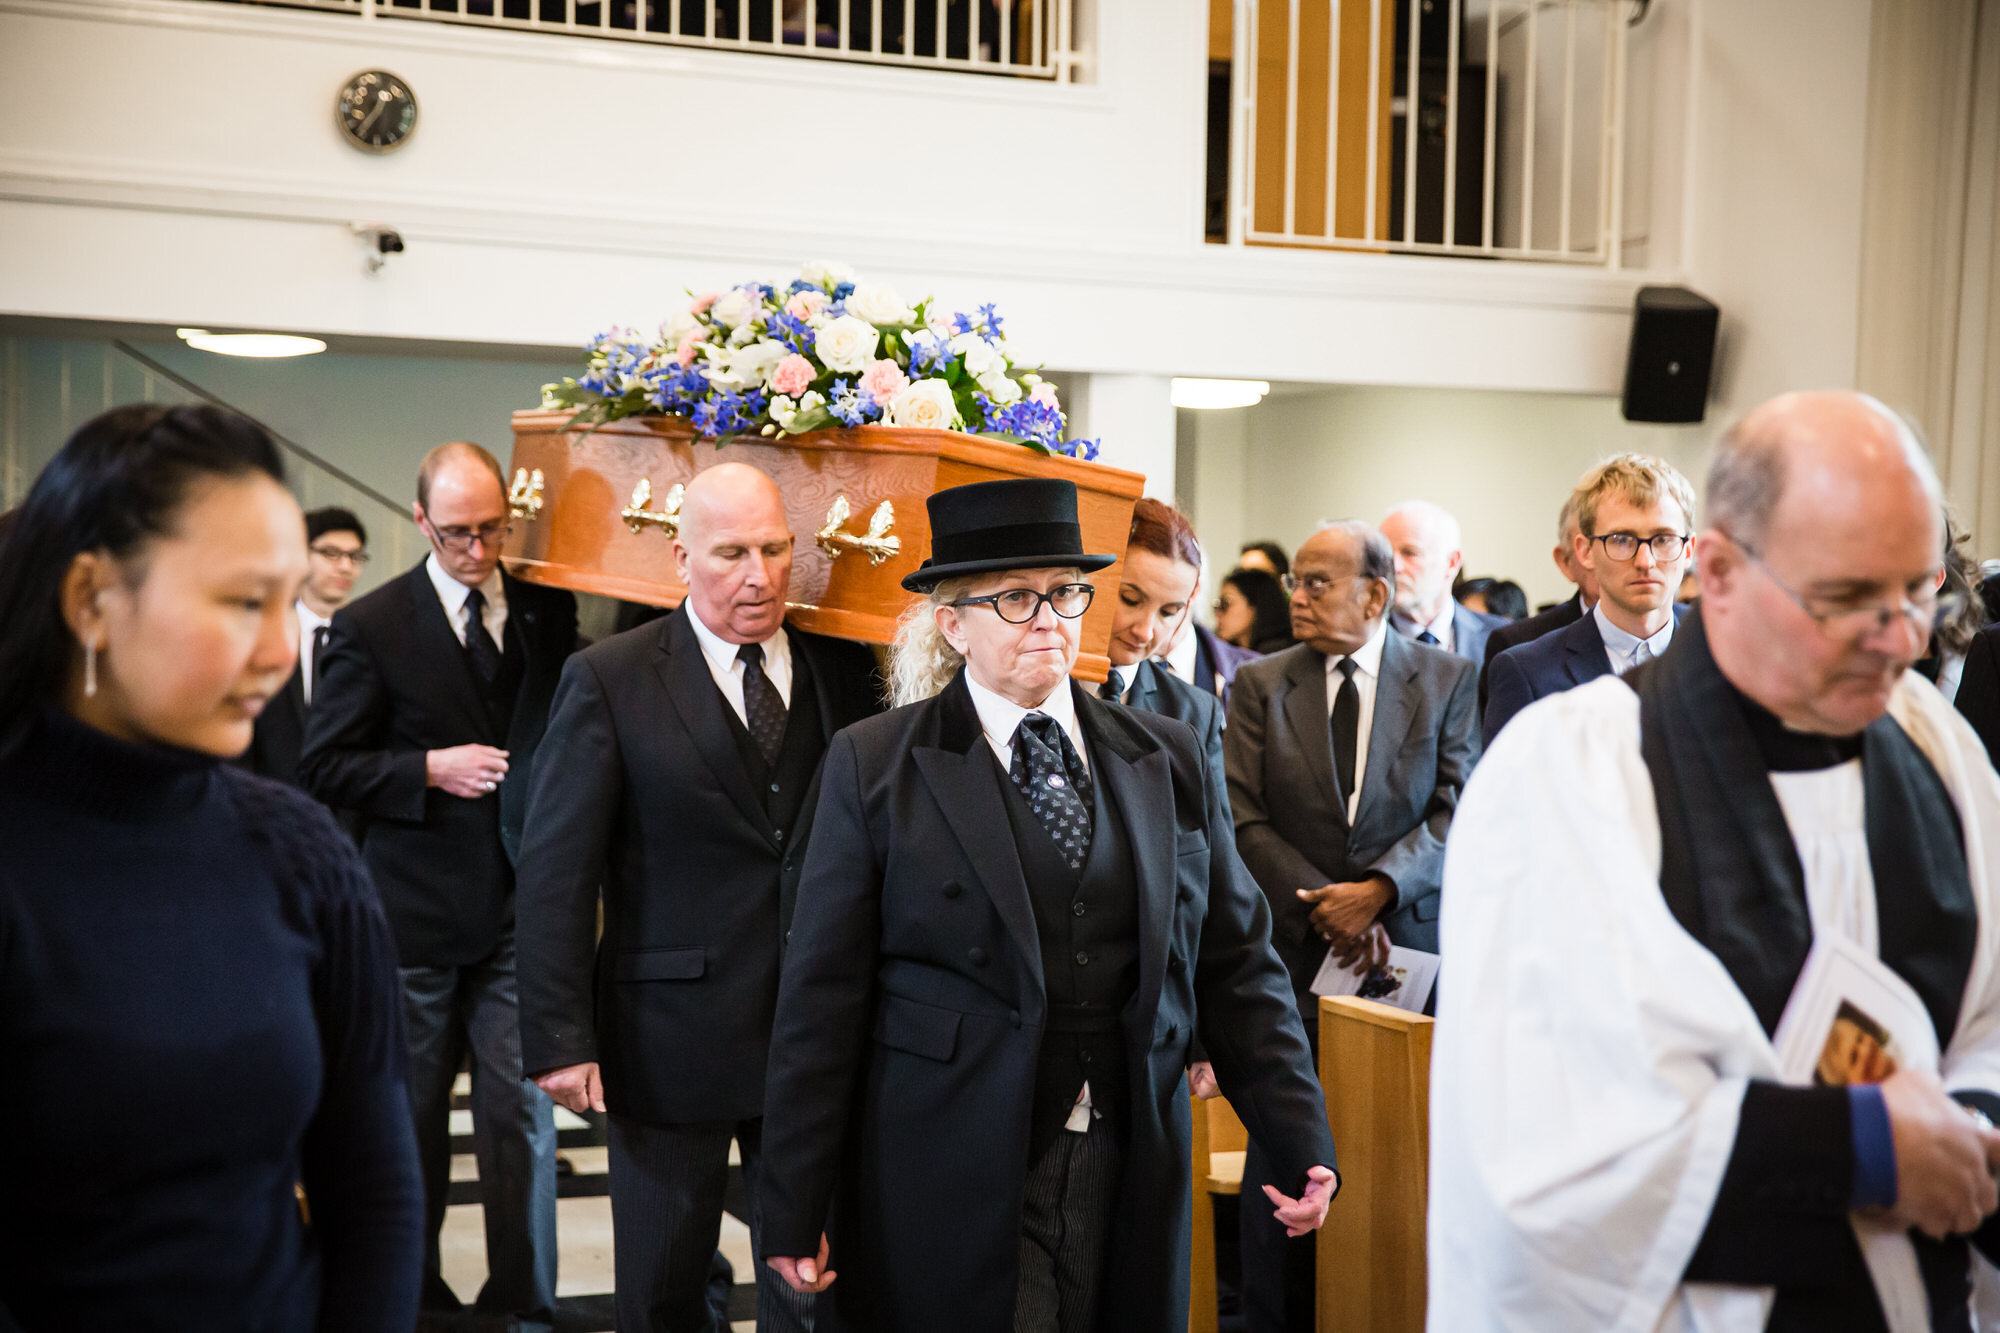 Funeral Photography at Chilterns Crematorium with Heritage & Son